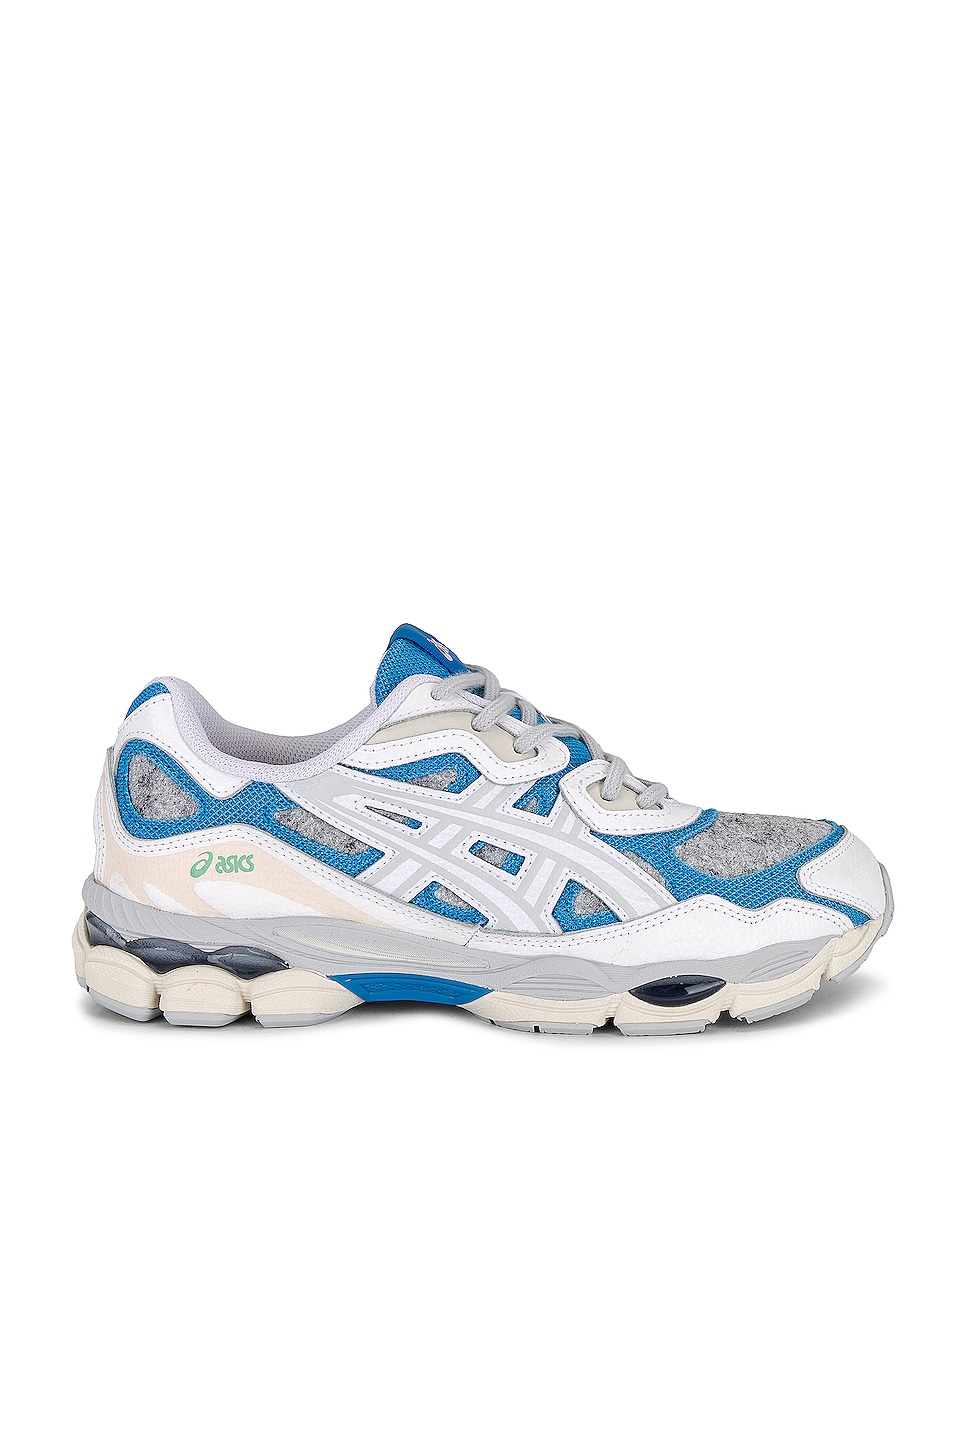 Image 1 of Asics Gel-nyc Sneaker in White & Dolphin Blue